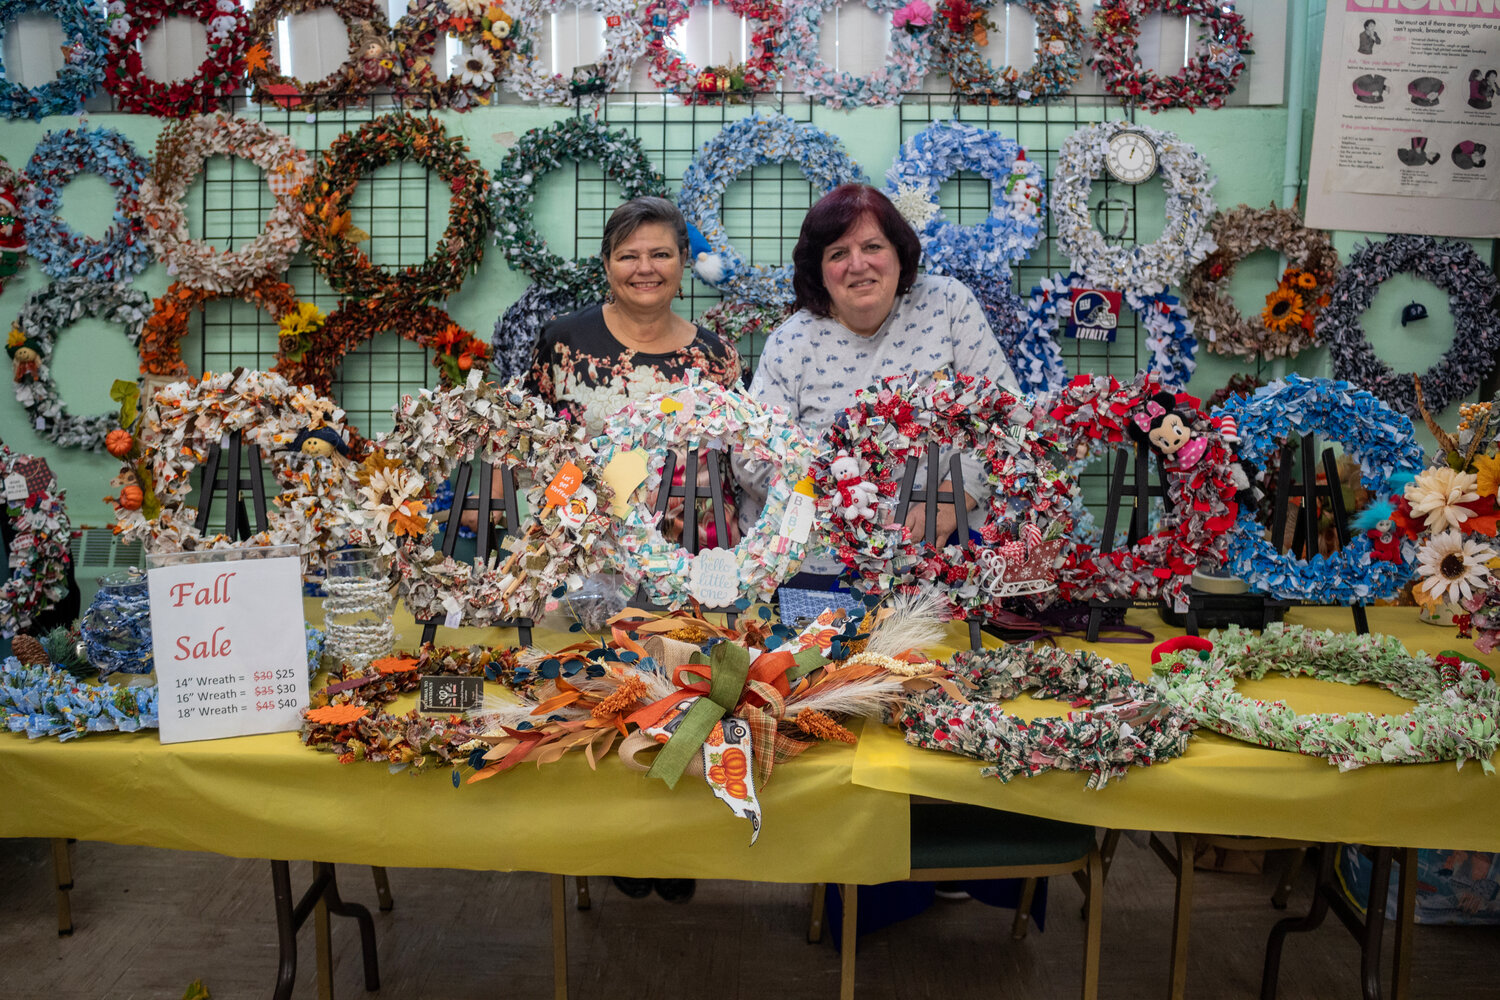 Marian Over and Lorraine Corvino stood behind a beautifully set up wreath booth during the country fair on Nov. 4.